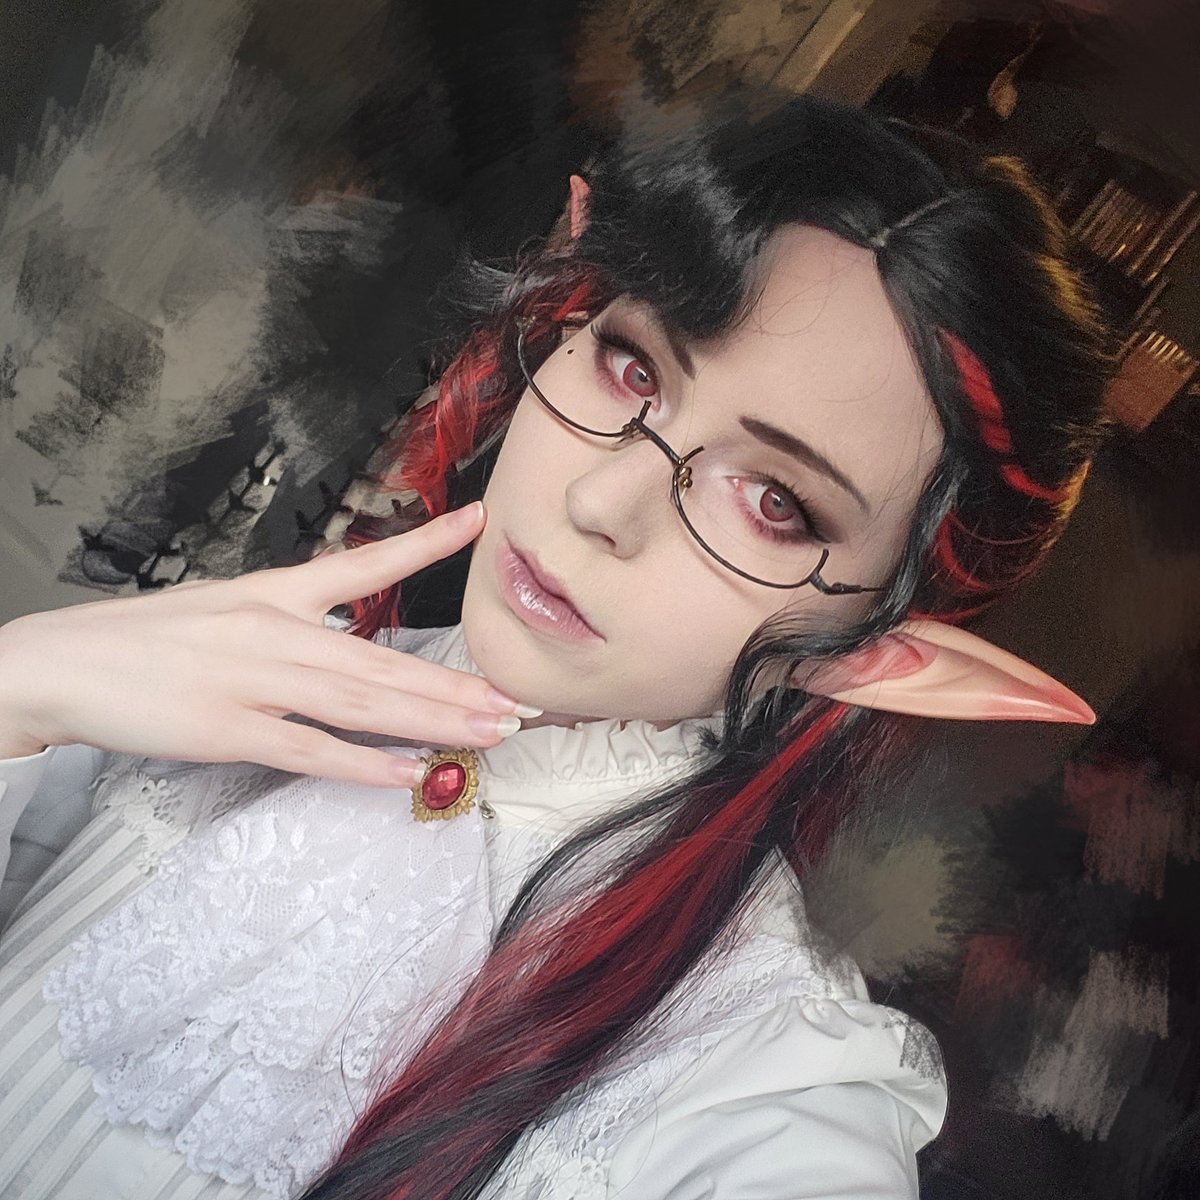 Hai to all kupocon goers I will be there on the Saturday as my wol!! As for the after party.... that's a secret only a few know 💪

Come say hi anyways, I'll be in full scholar fit!